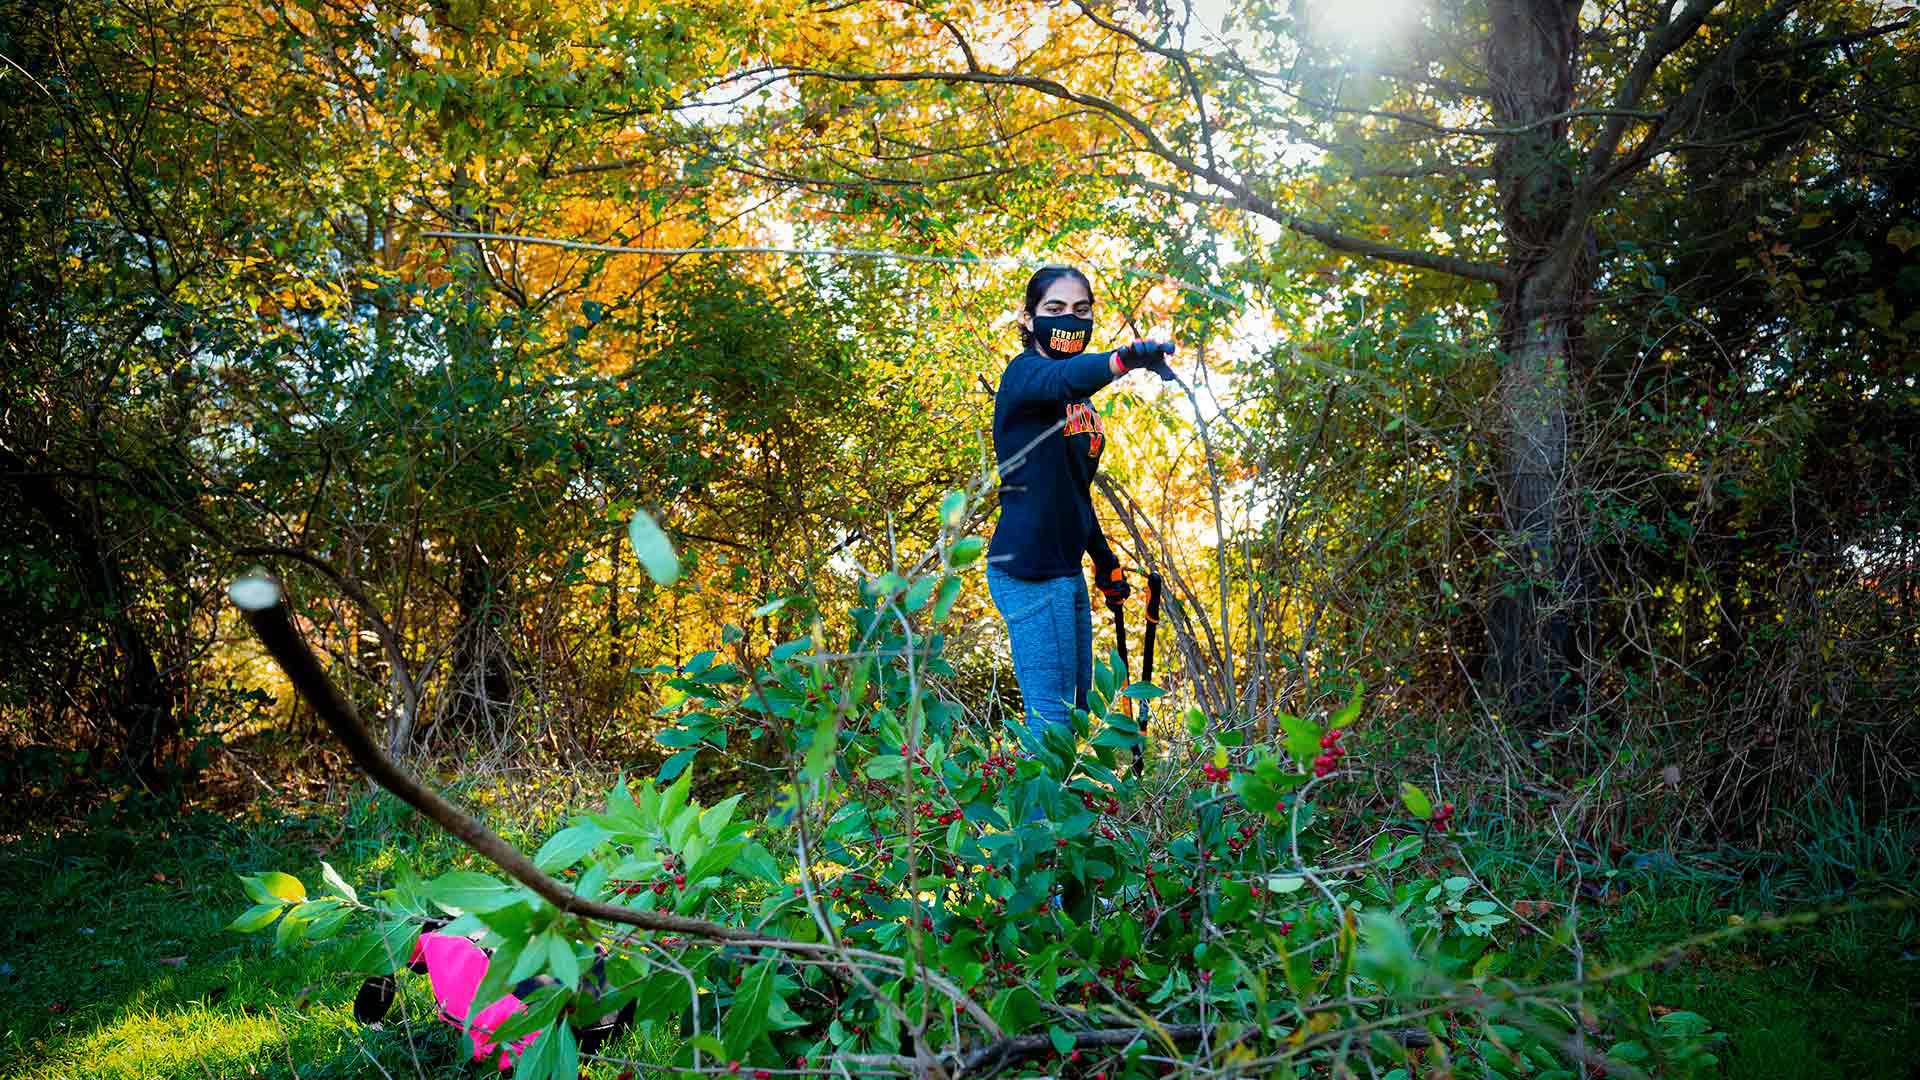  Neha Katanguri, a freshman from Glenelg, Md., piles up invasive plants she’s pulled out while volunteering at Lake Artemesia for Good Neighbor Day on Saturday. She was among 373 participants in virtual and in-person events on the ninth annual day of volunteer service. (Photos by Stephanie S. Cordle)